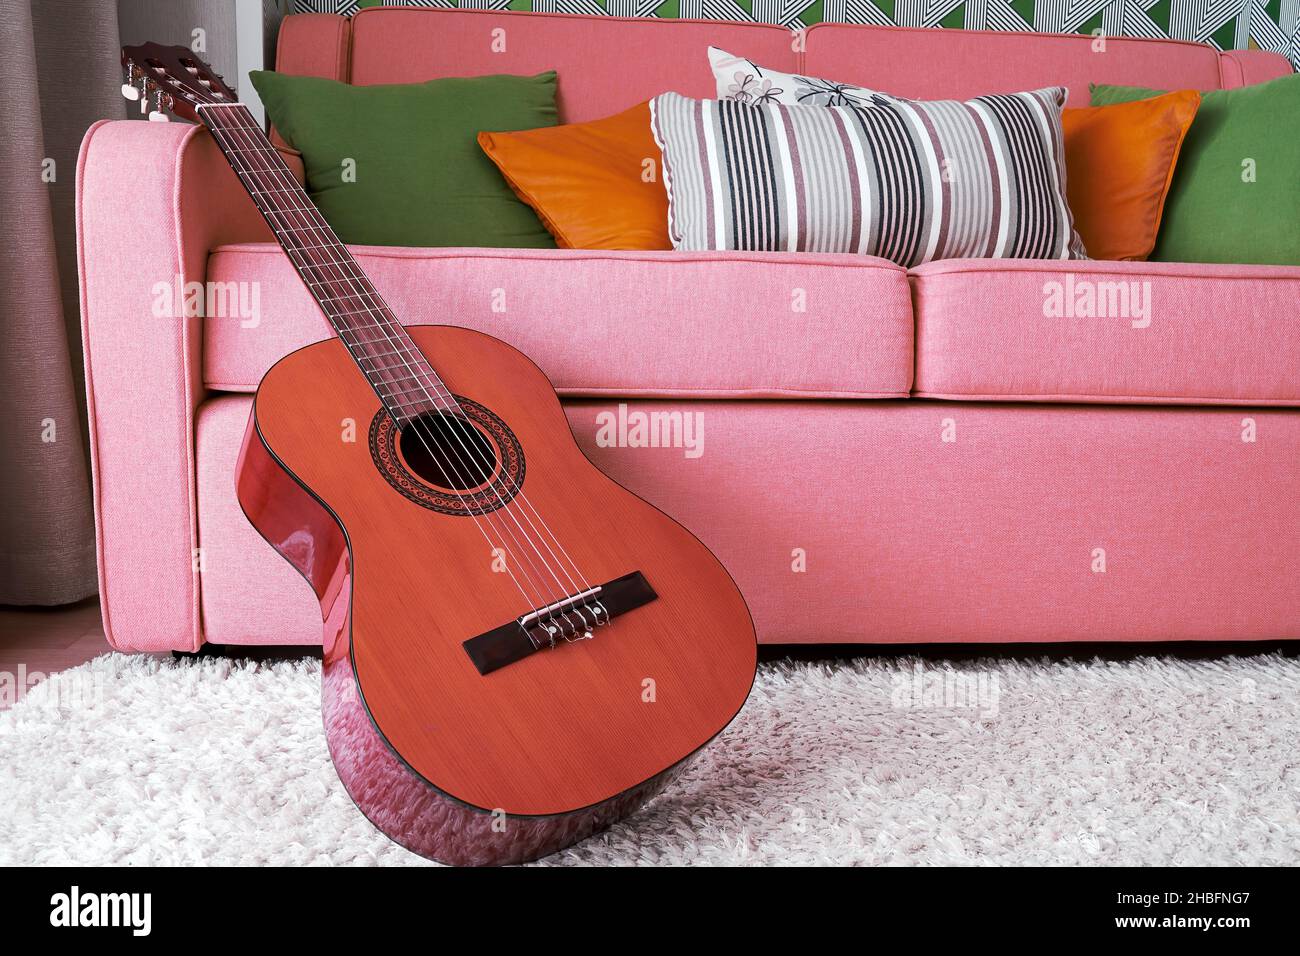 Classic acoustic guitar in the pink interior. Music hobby backgrounds Stock Photo